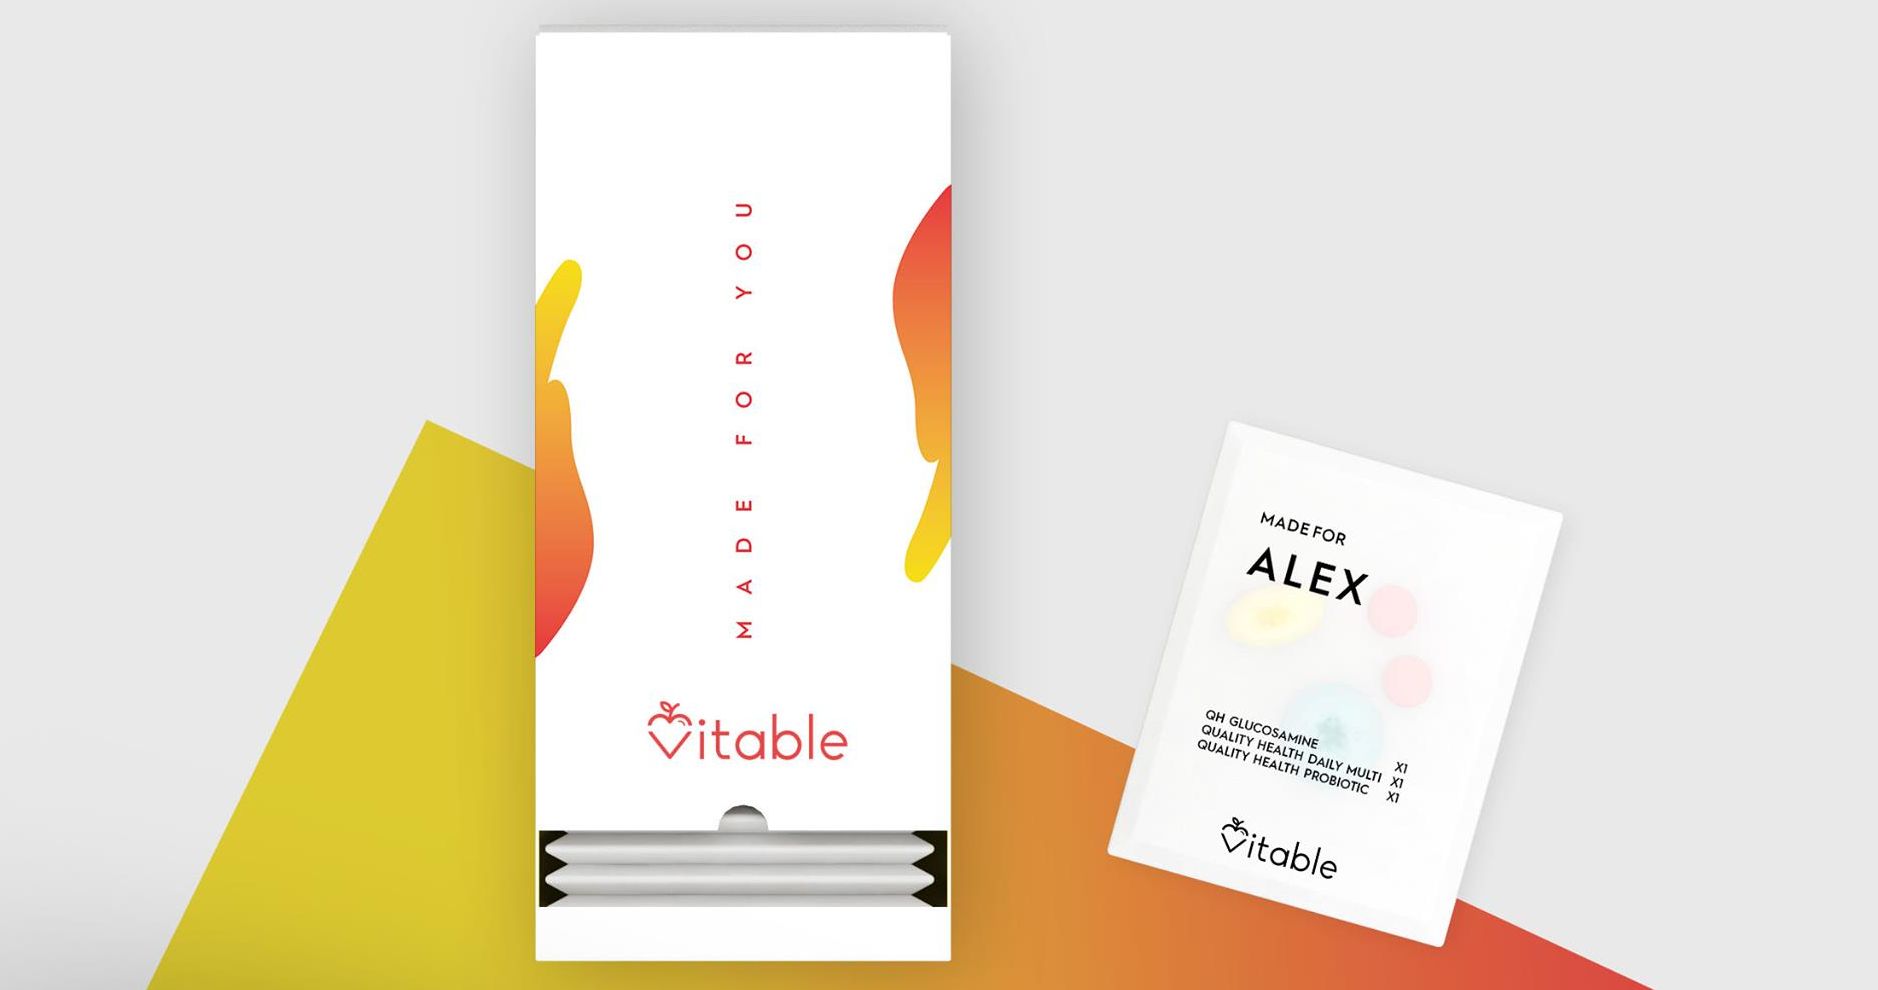 Vitable - 50% OFF Exclusive Coupon